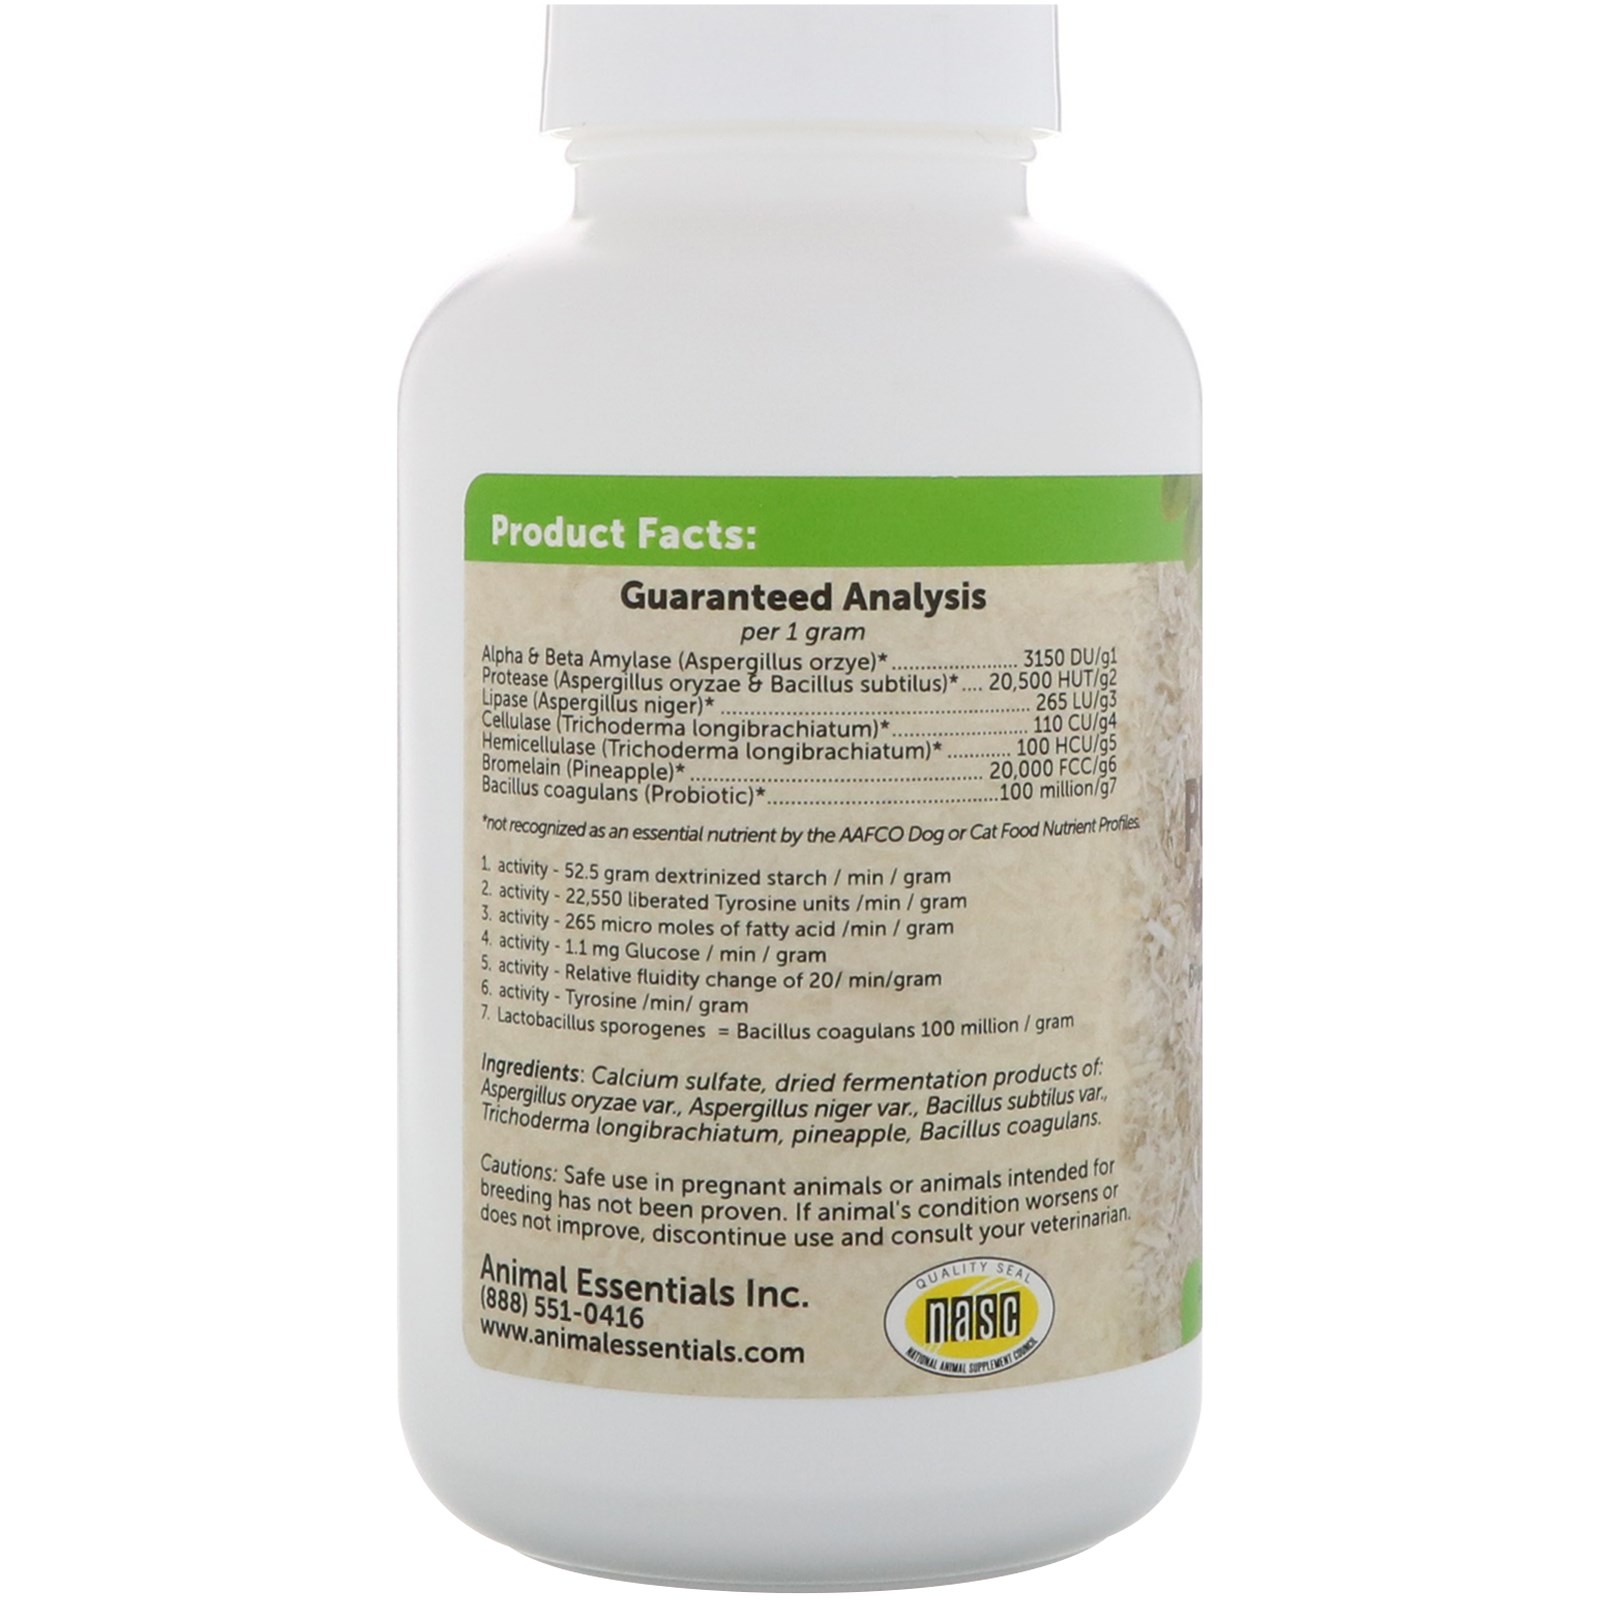 Animal Essentials Probiotic Clearance, SAVE 58%.